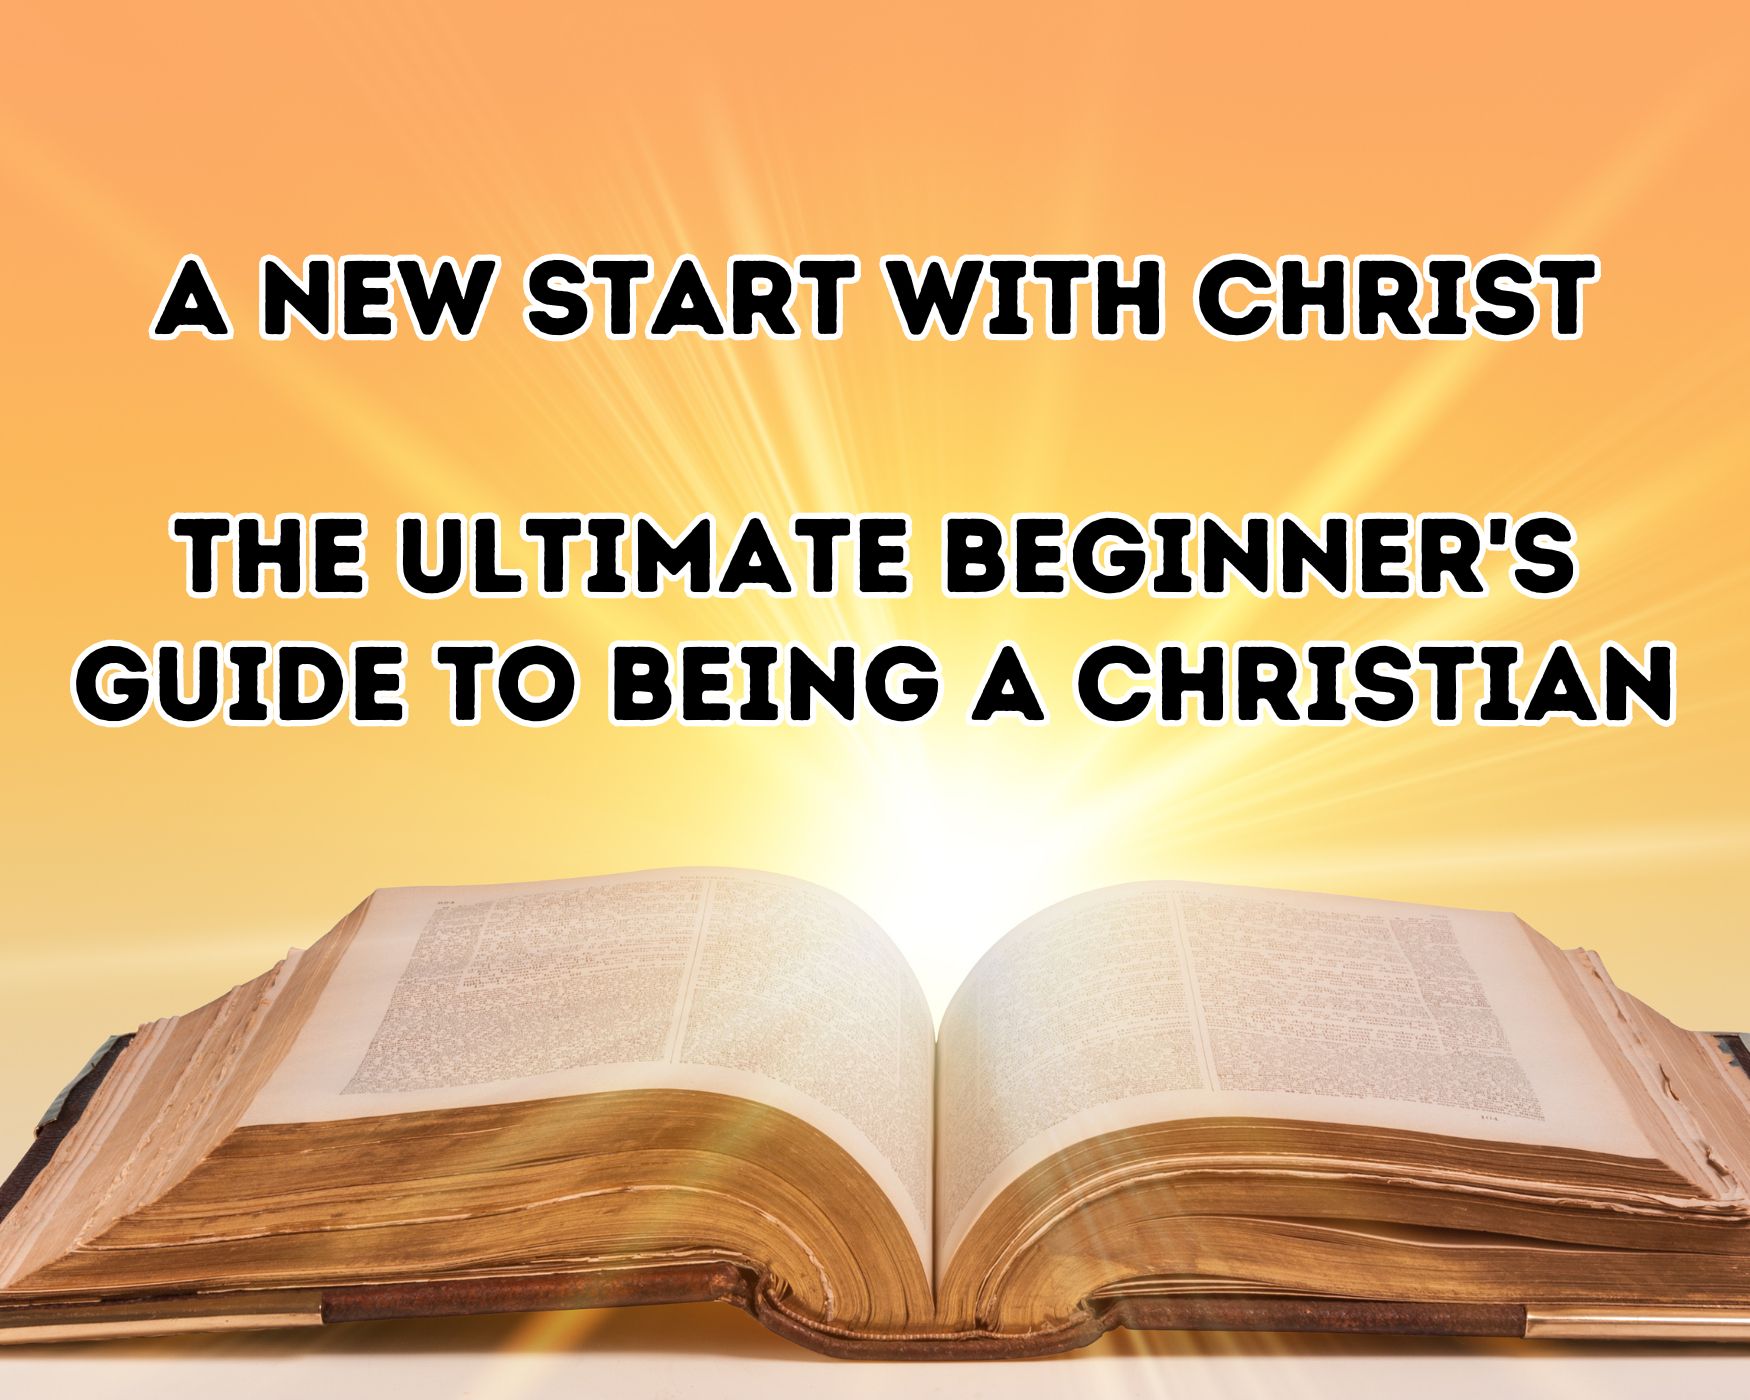 The Ultimate Beginner's Guide to Being a Christian